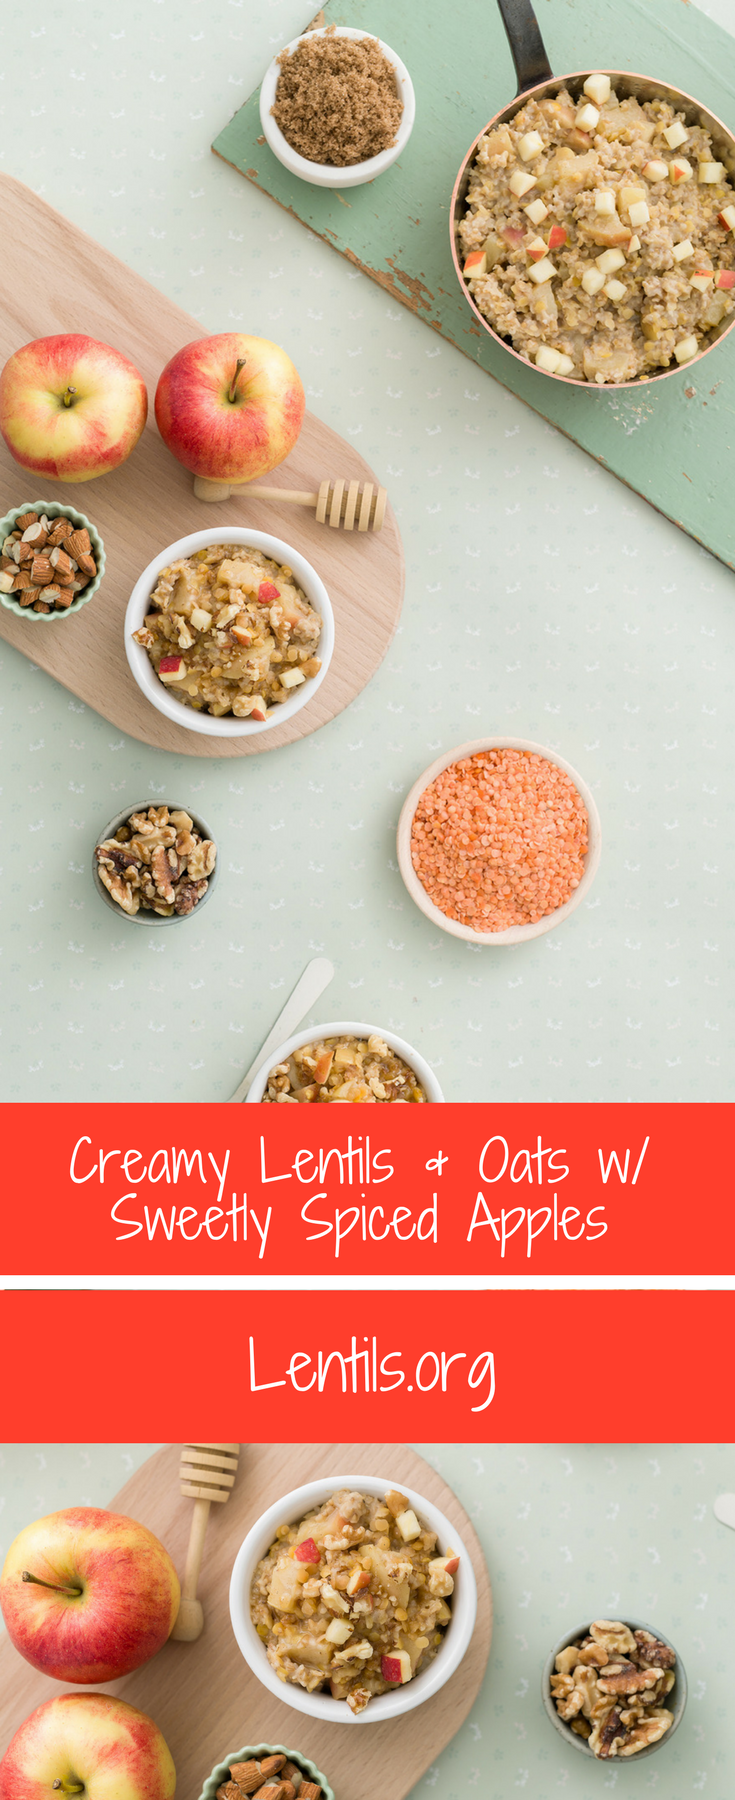 Creamy Lentils & Oats with Sweetly Spiced Apples – Lentils.org